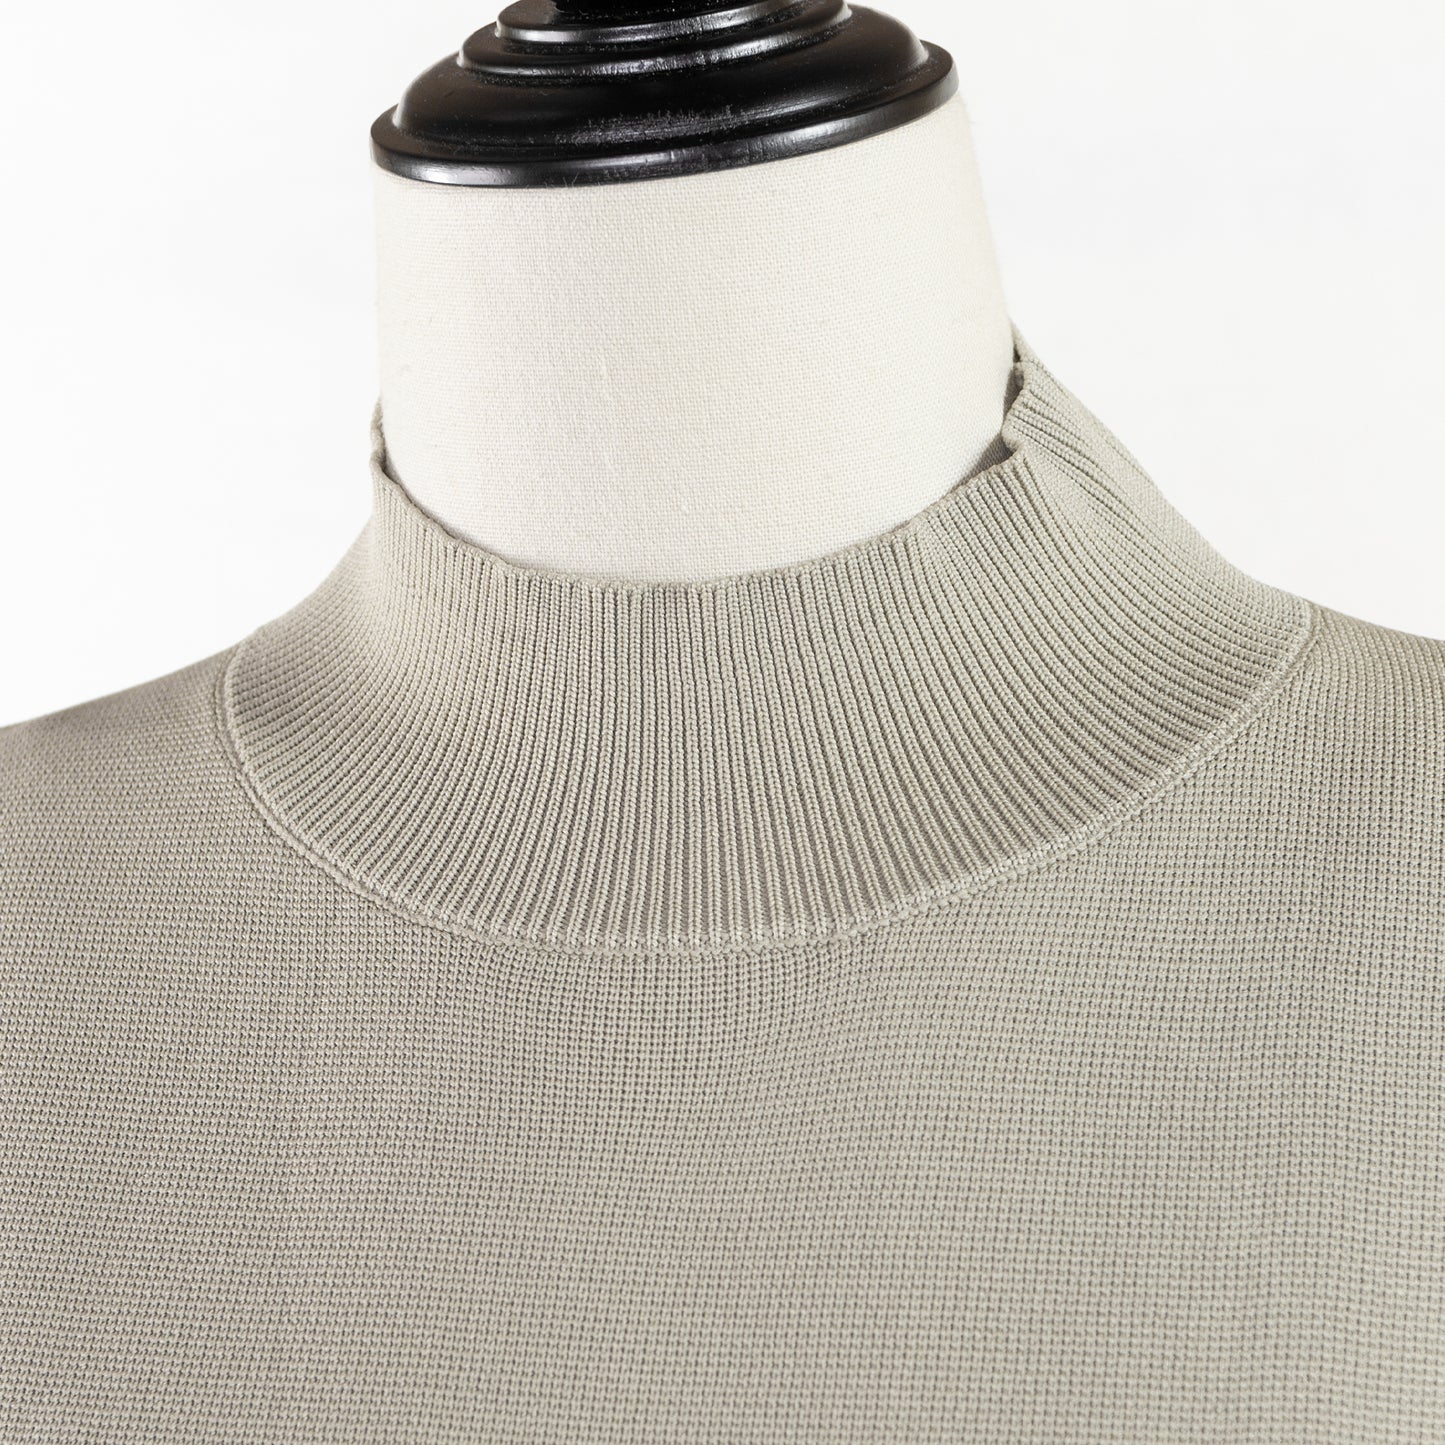 STAMP AND DIARY MILANO RIB BOTTLE NECK PULLOVER